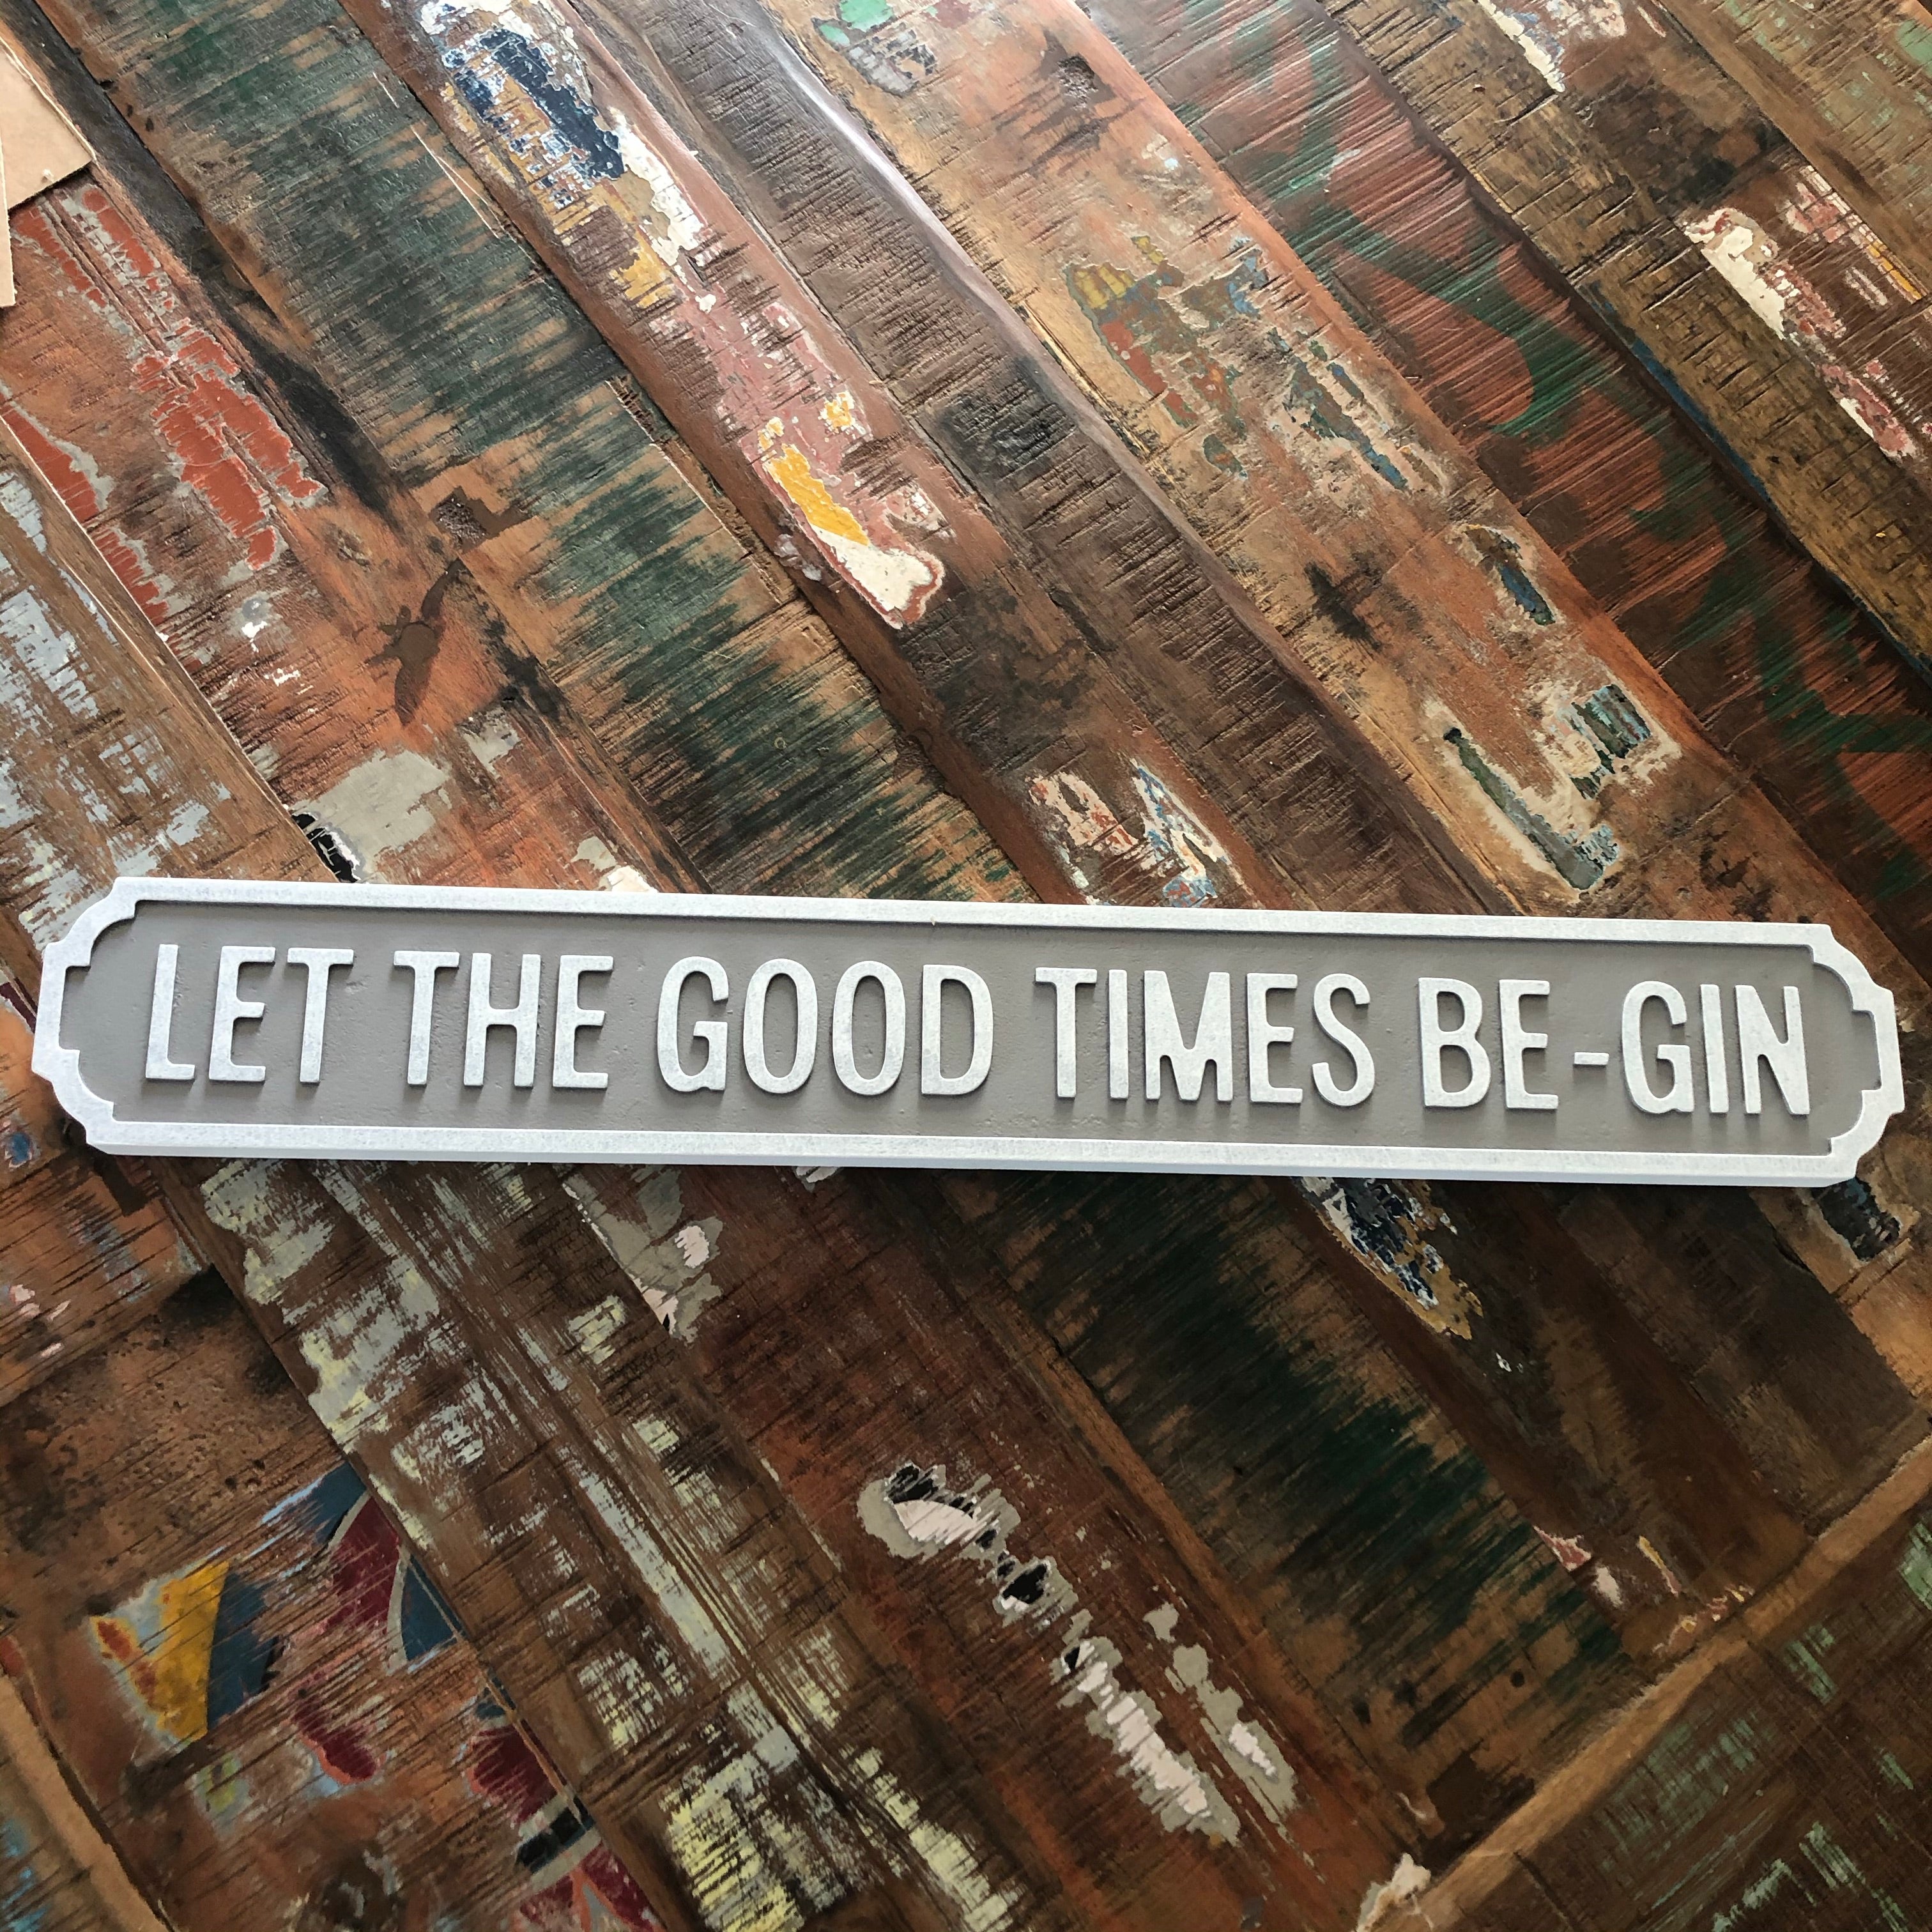 LET THE GOOD TIMES BE-GIN Wooden STREET ROAD SIGN